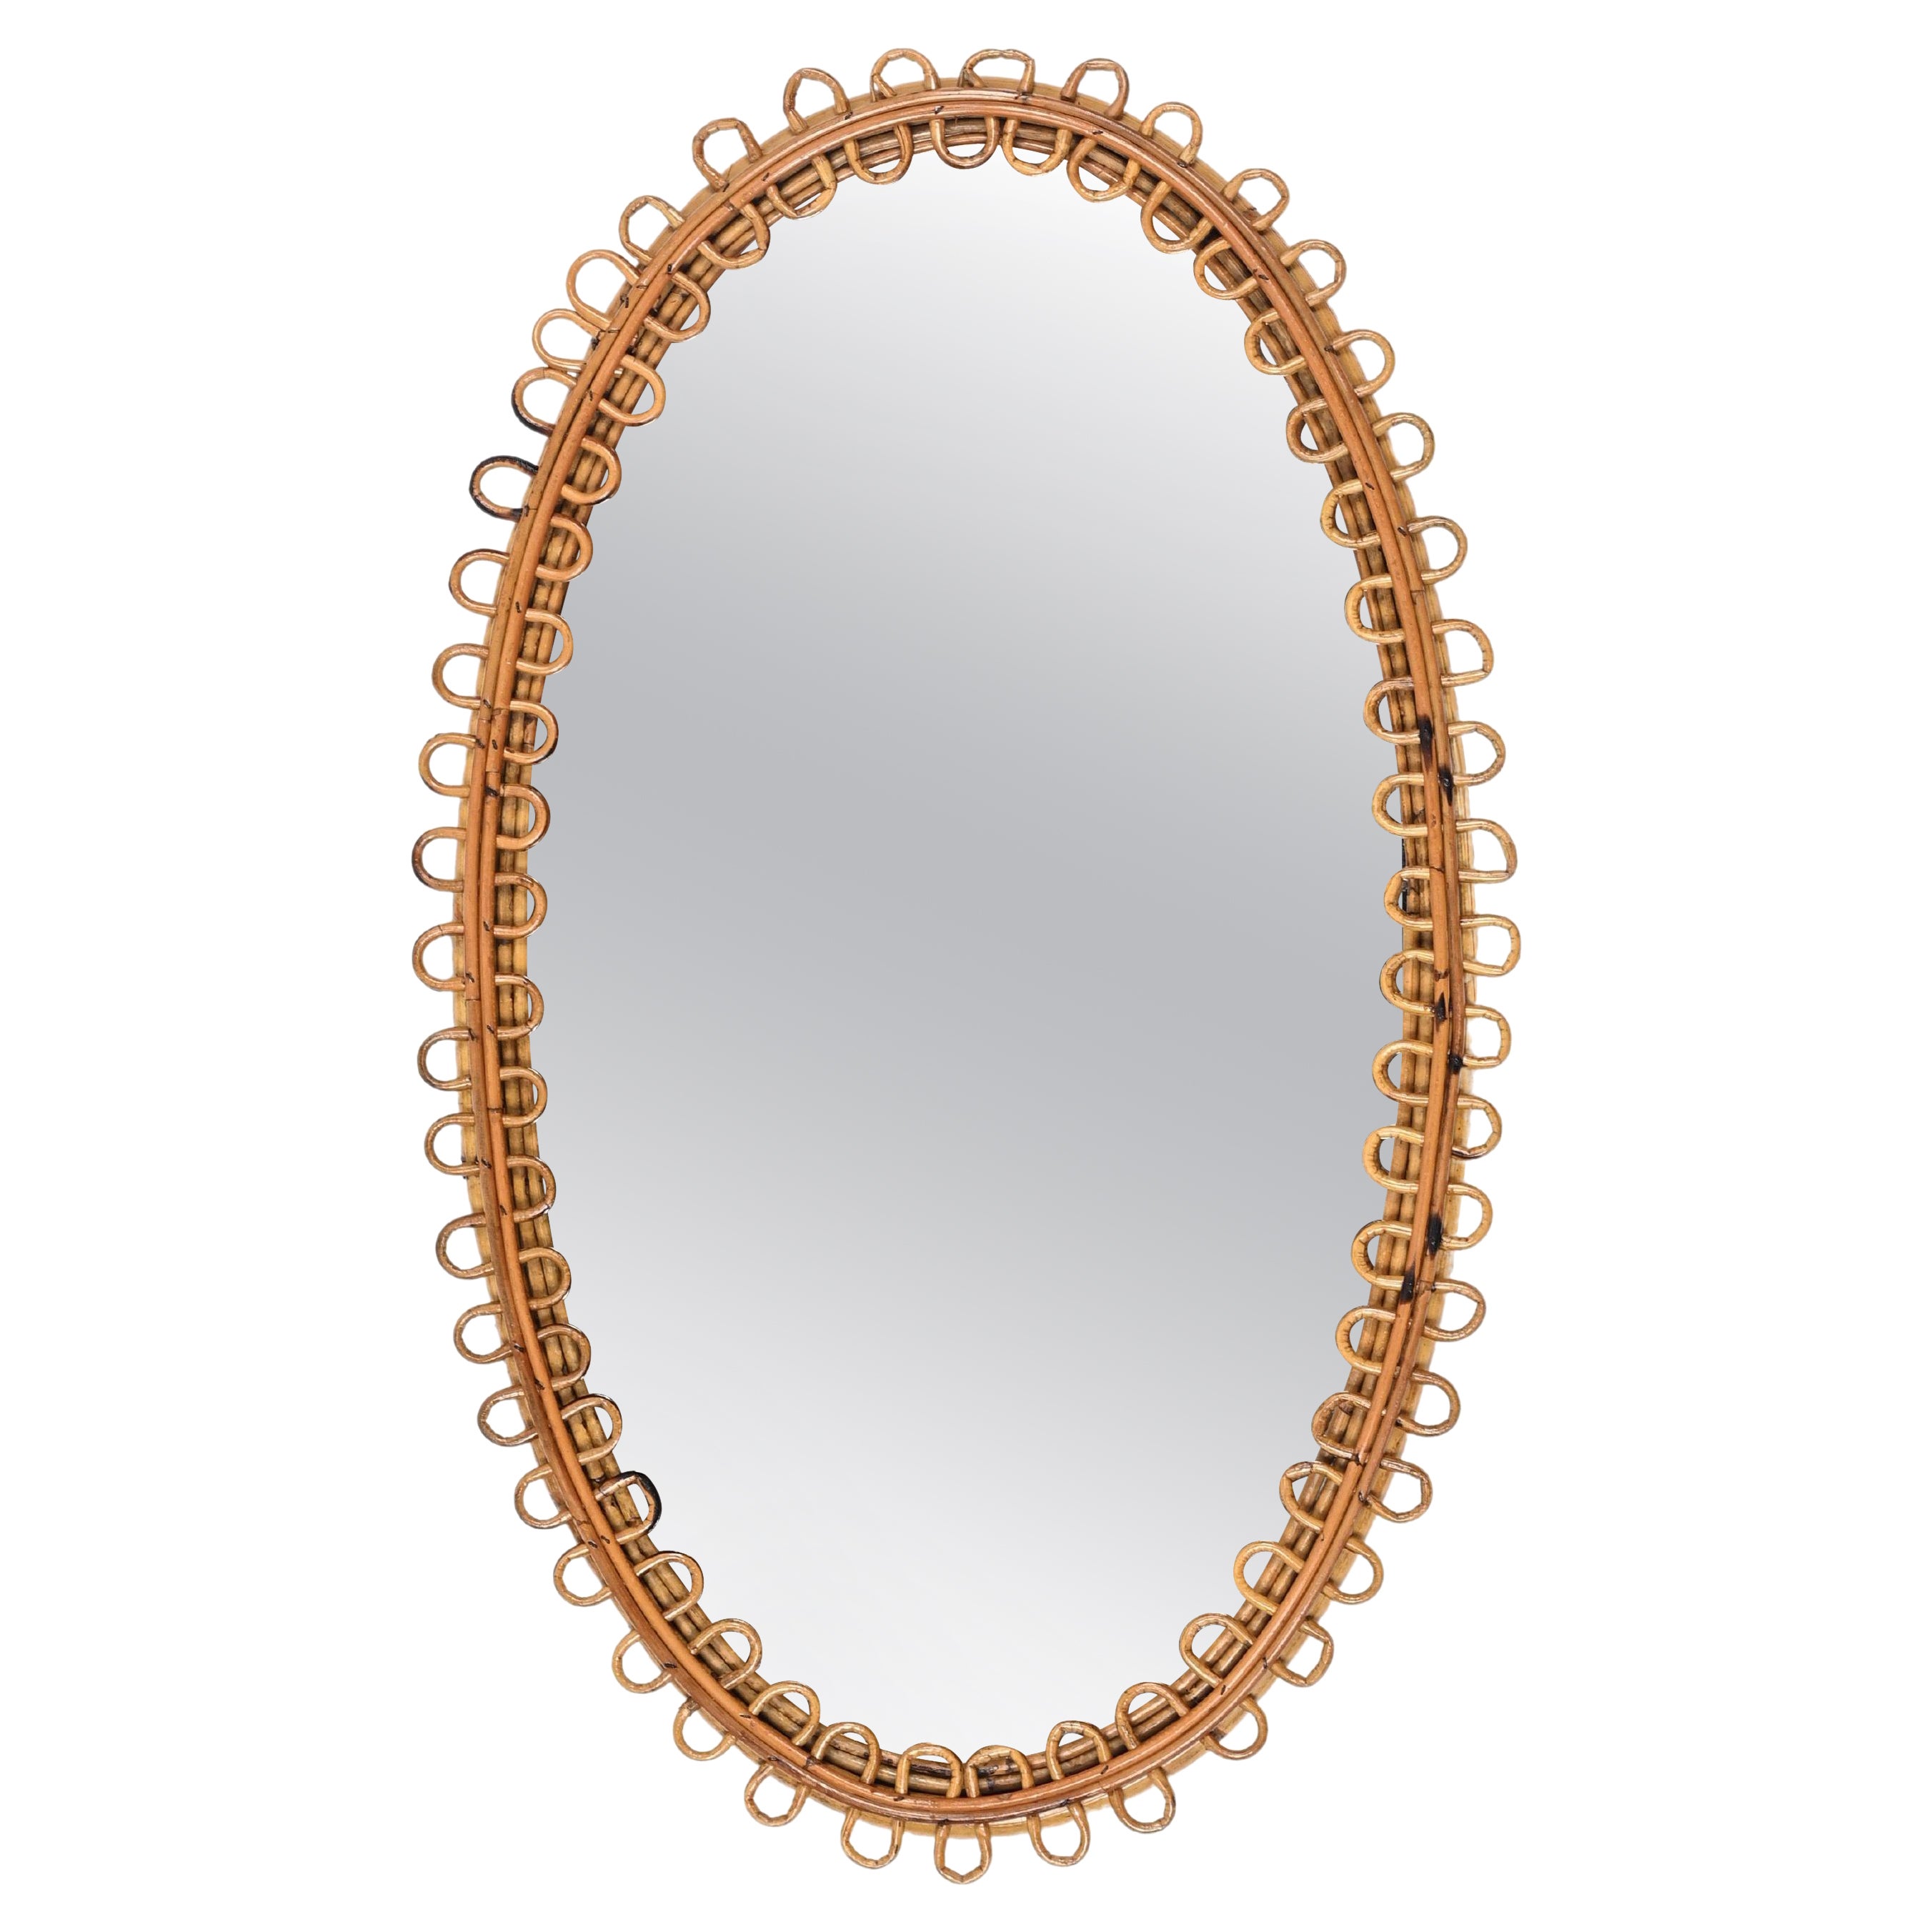 Midcentury French Riviera Oval Mirror in Curved Rattan and Bamboo, Italy 1960s